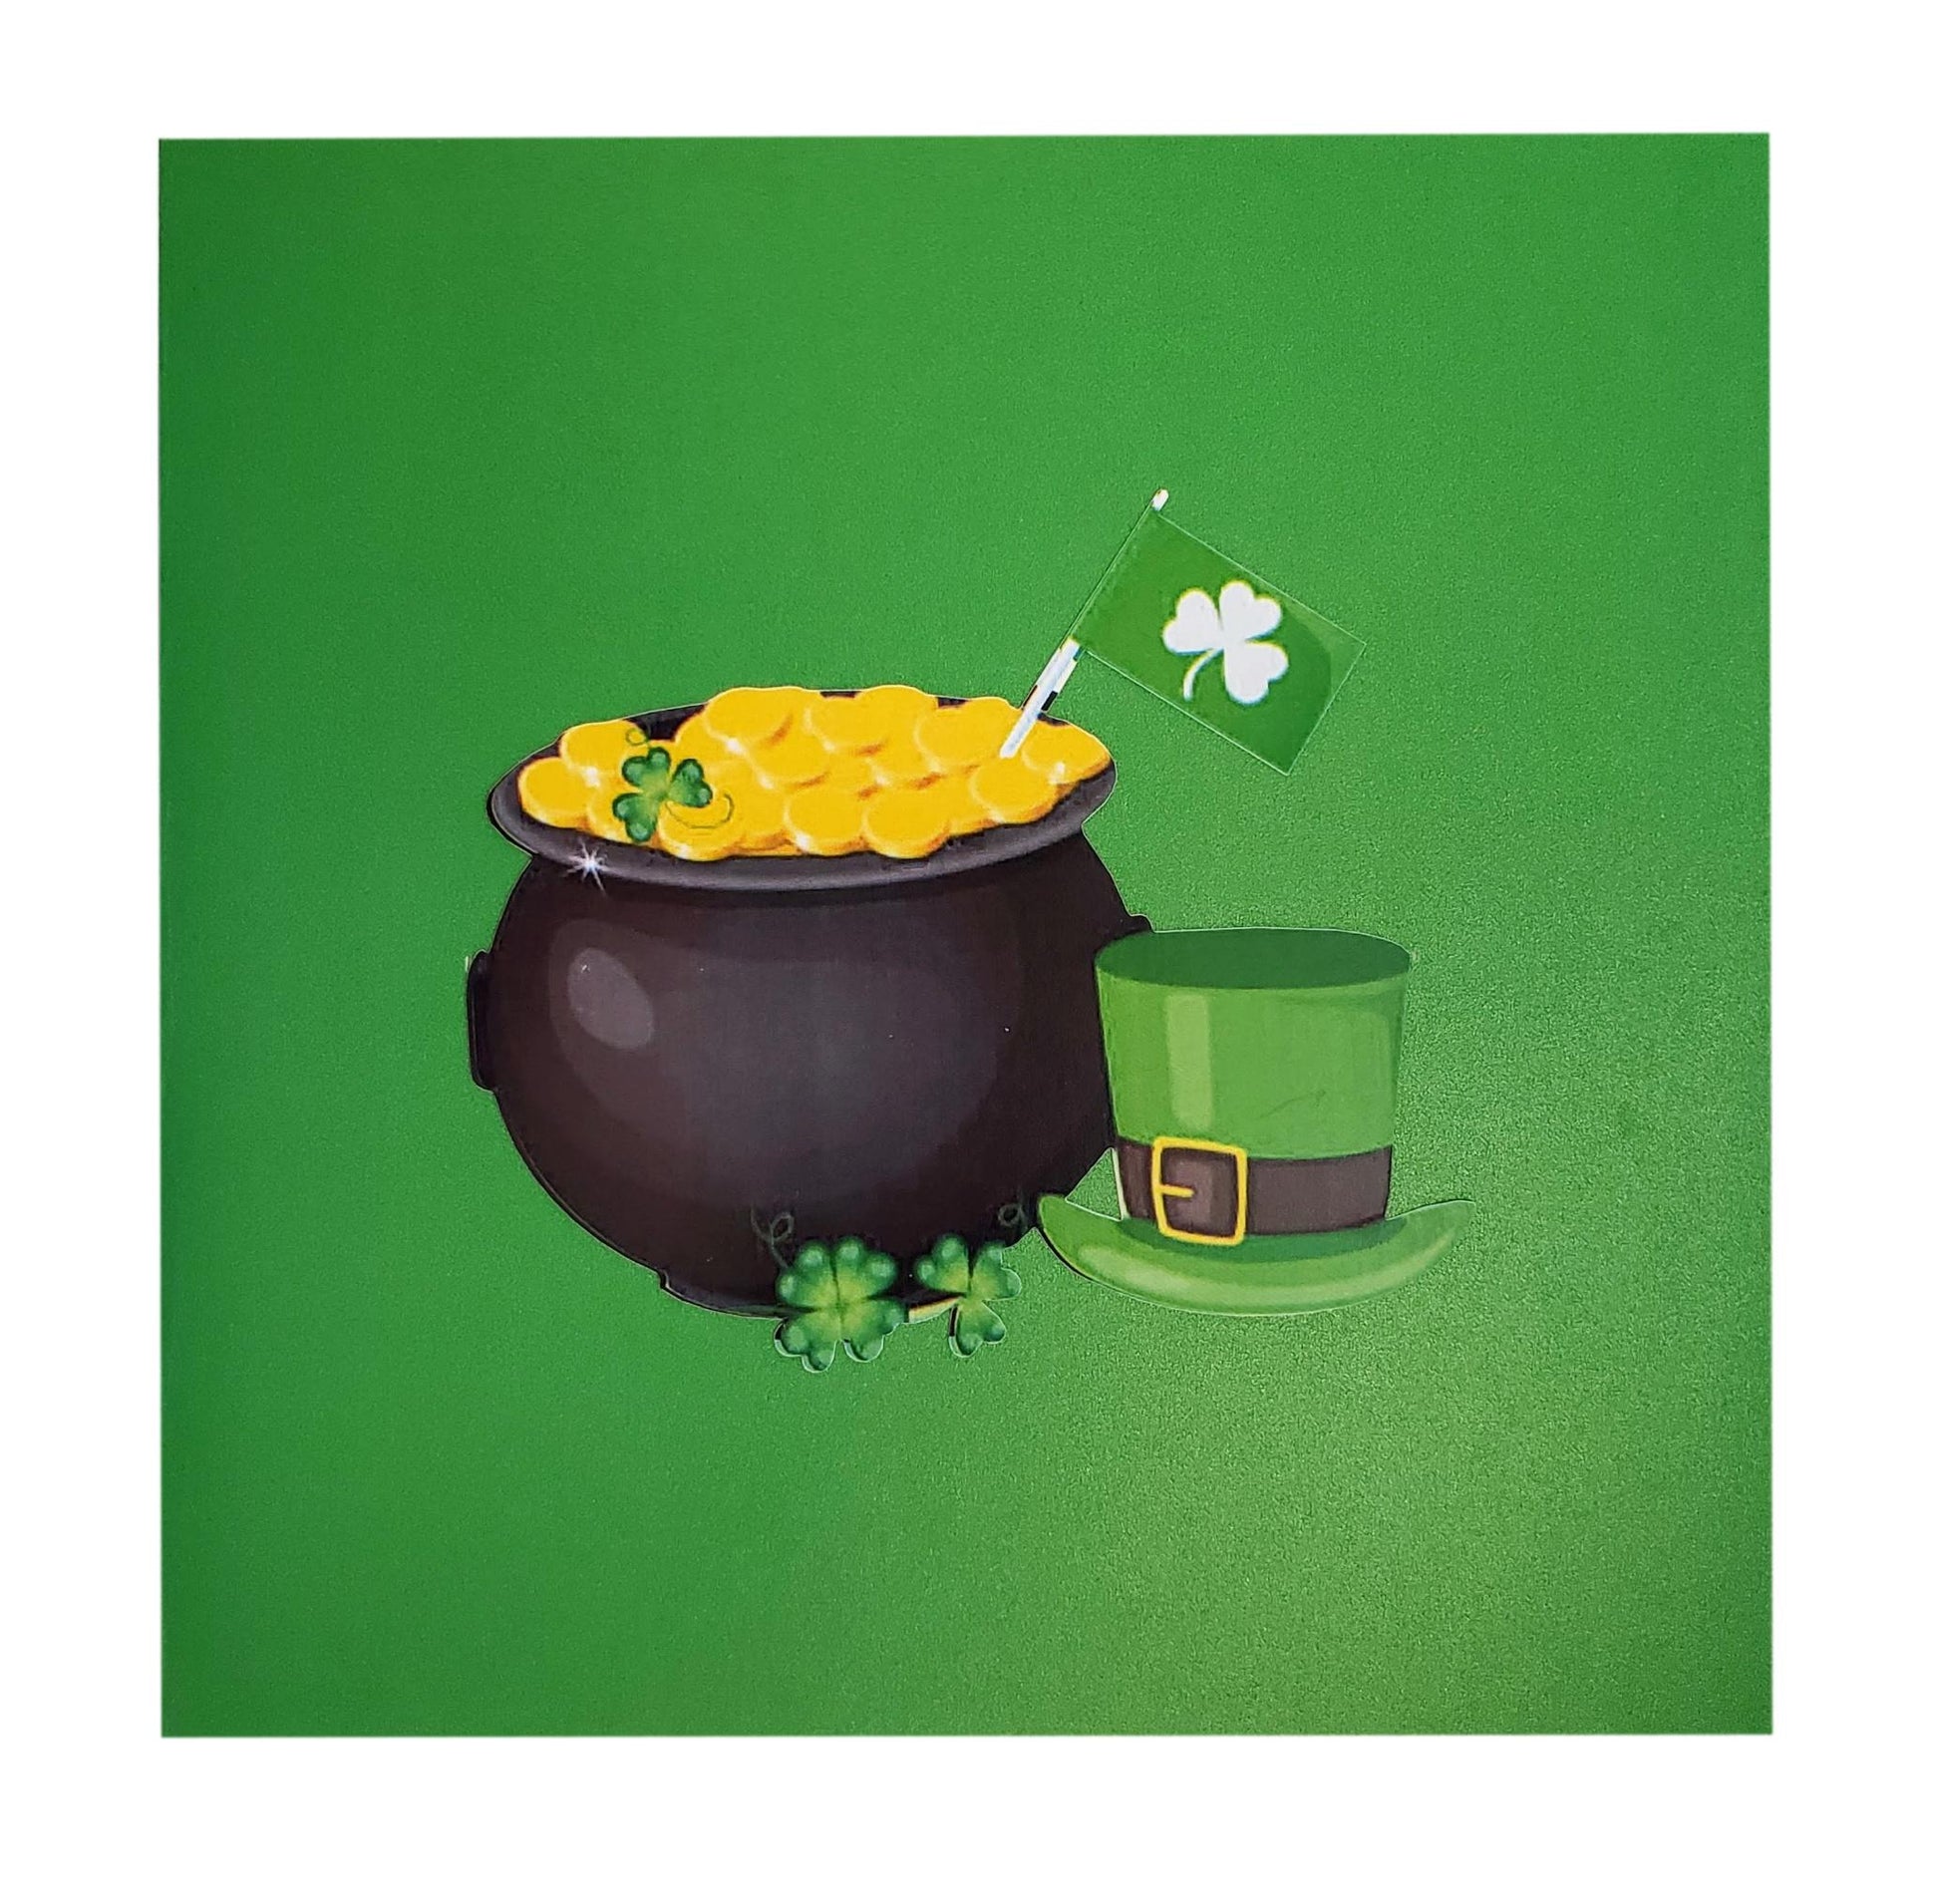 Pot of Gold 3D Pop Up Greeting Card - Fun - Just Because - Special Days - St. Patrick's Day - Thinki - iGifts And Cards